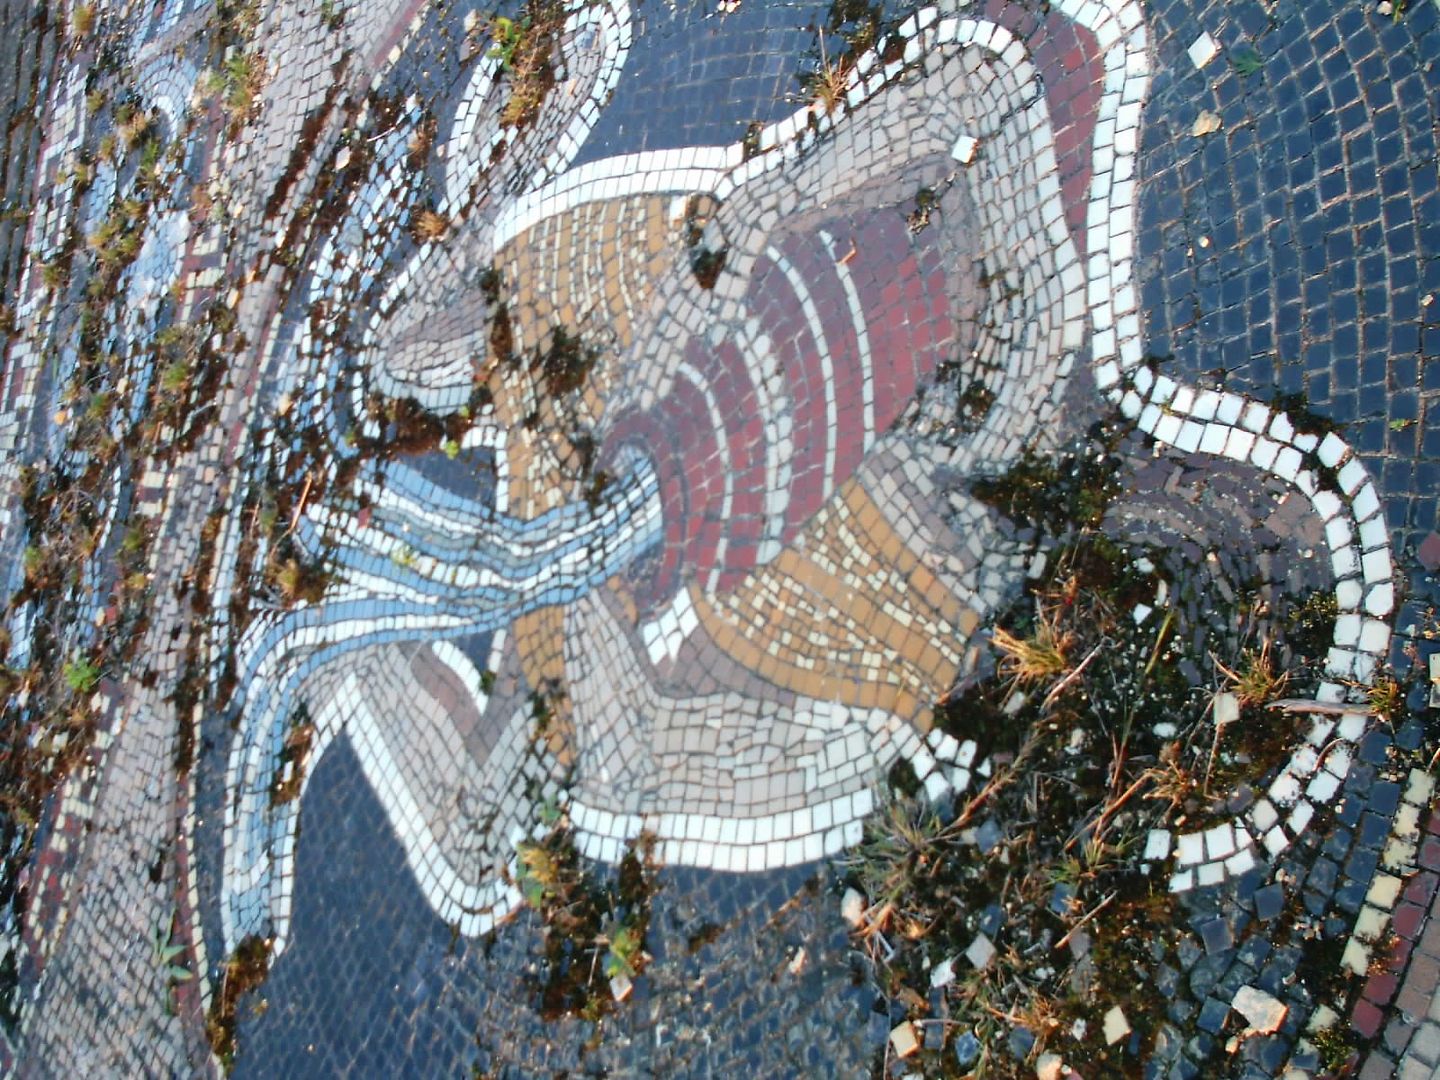 anyone know how to repair outdoor mosaics?